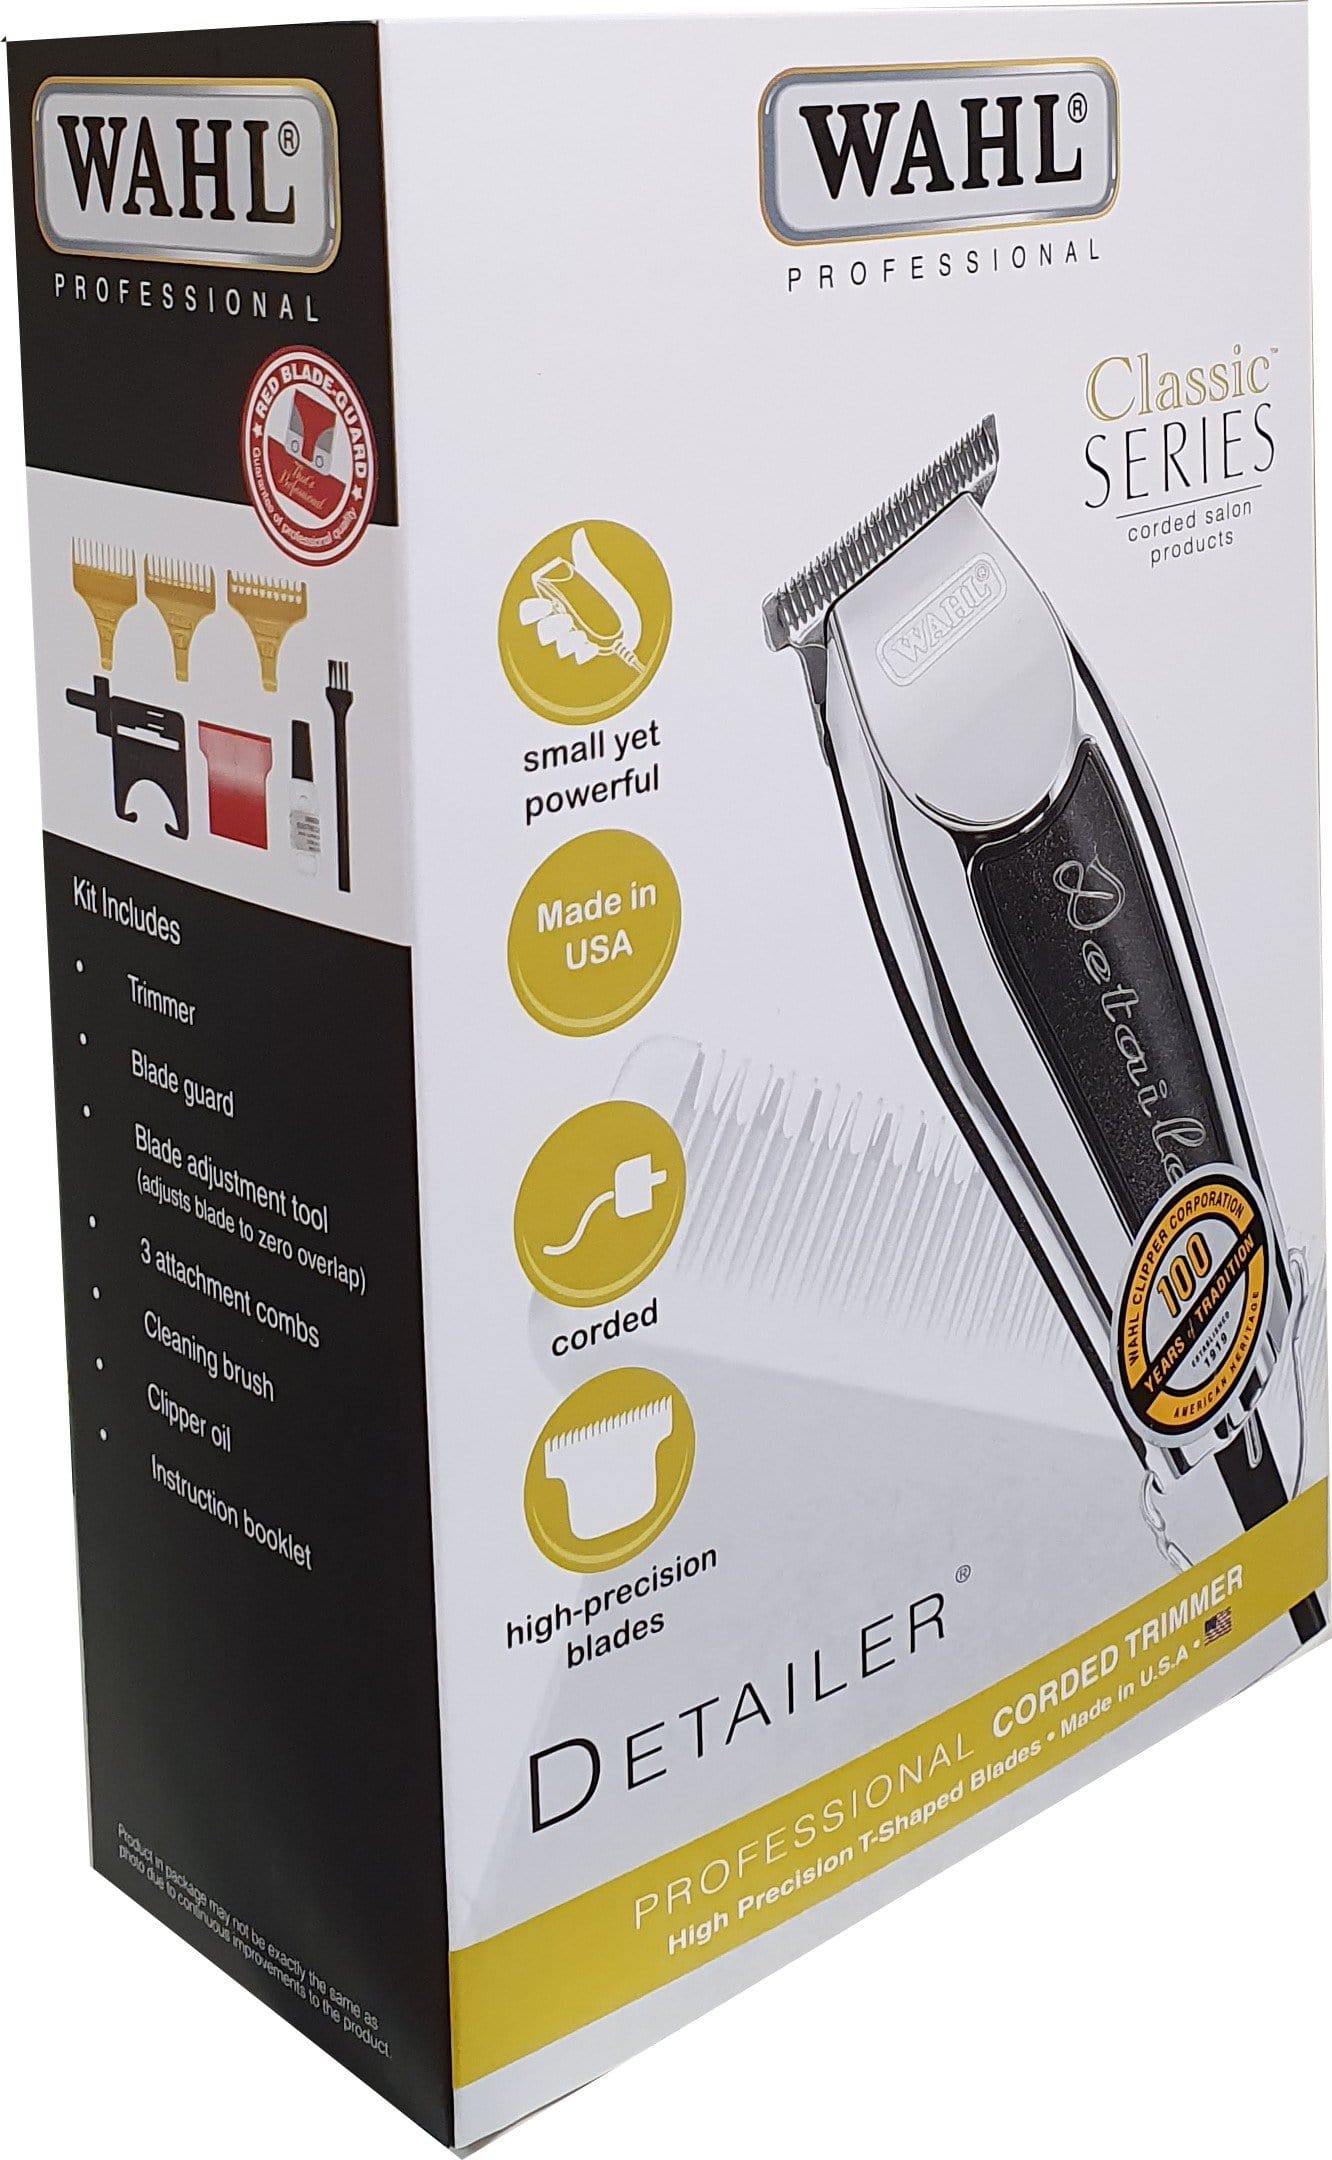 Wahl Classic Series Detailer Professional Corded Trimmer